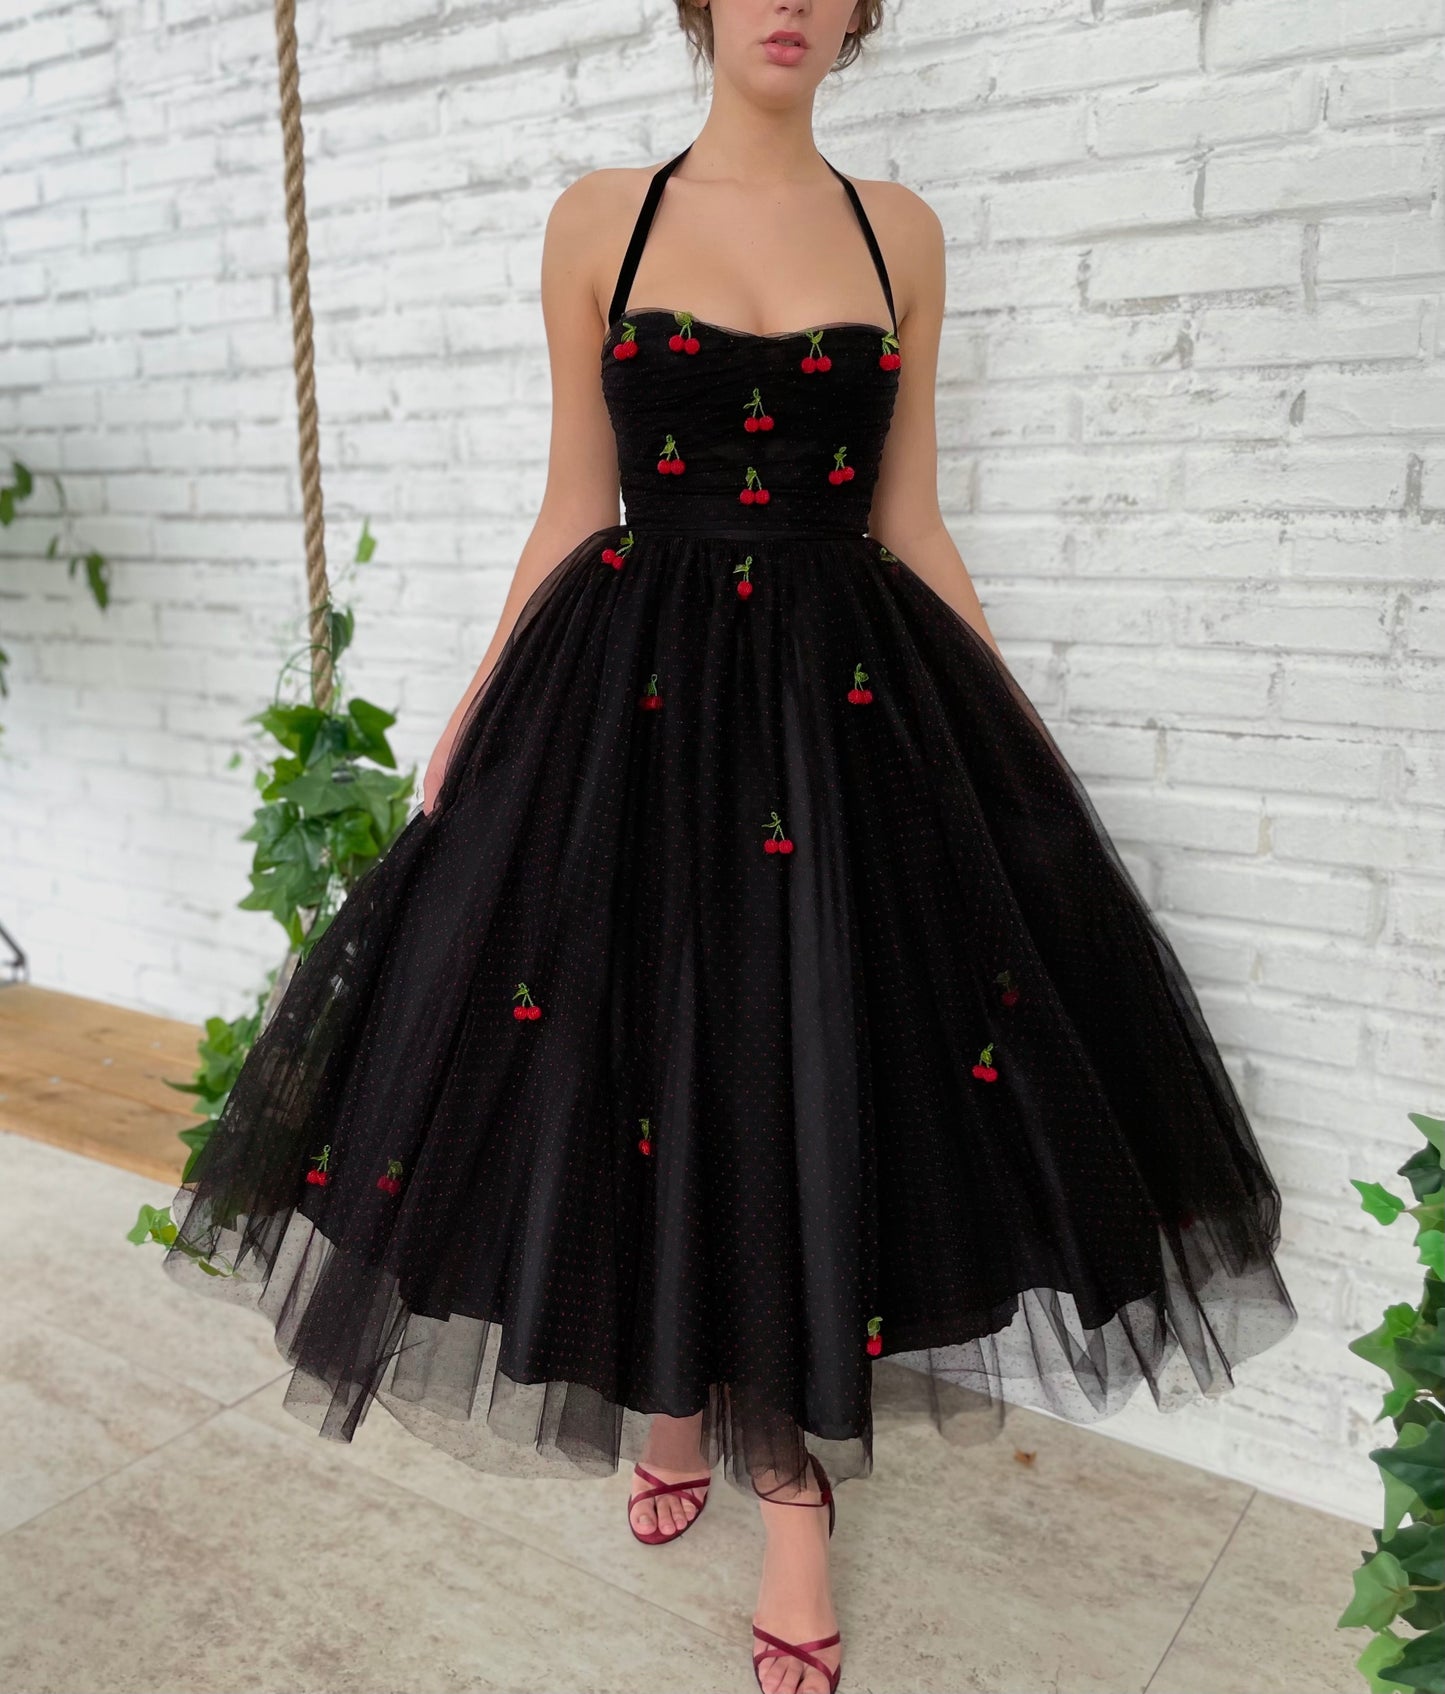 Black midi dress with spaghetti straps and embroidered cherries